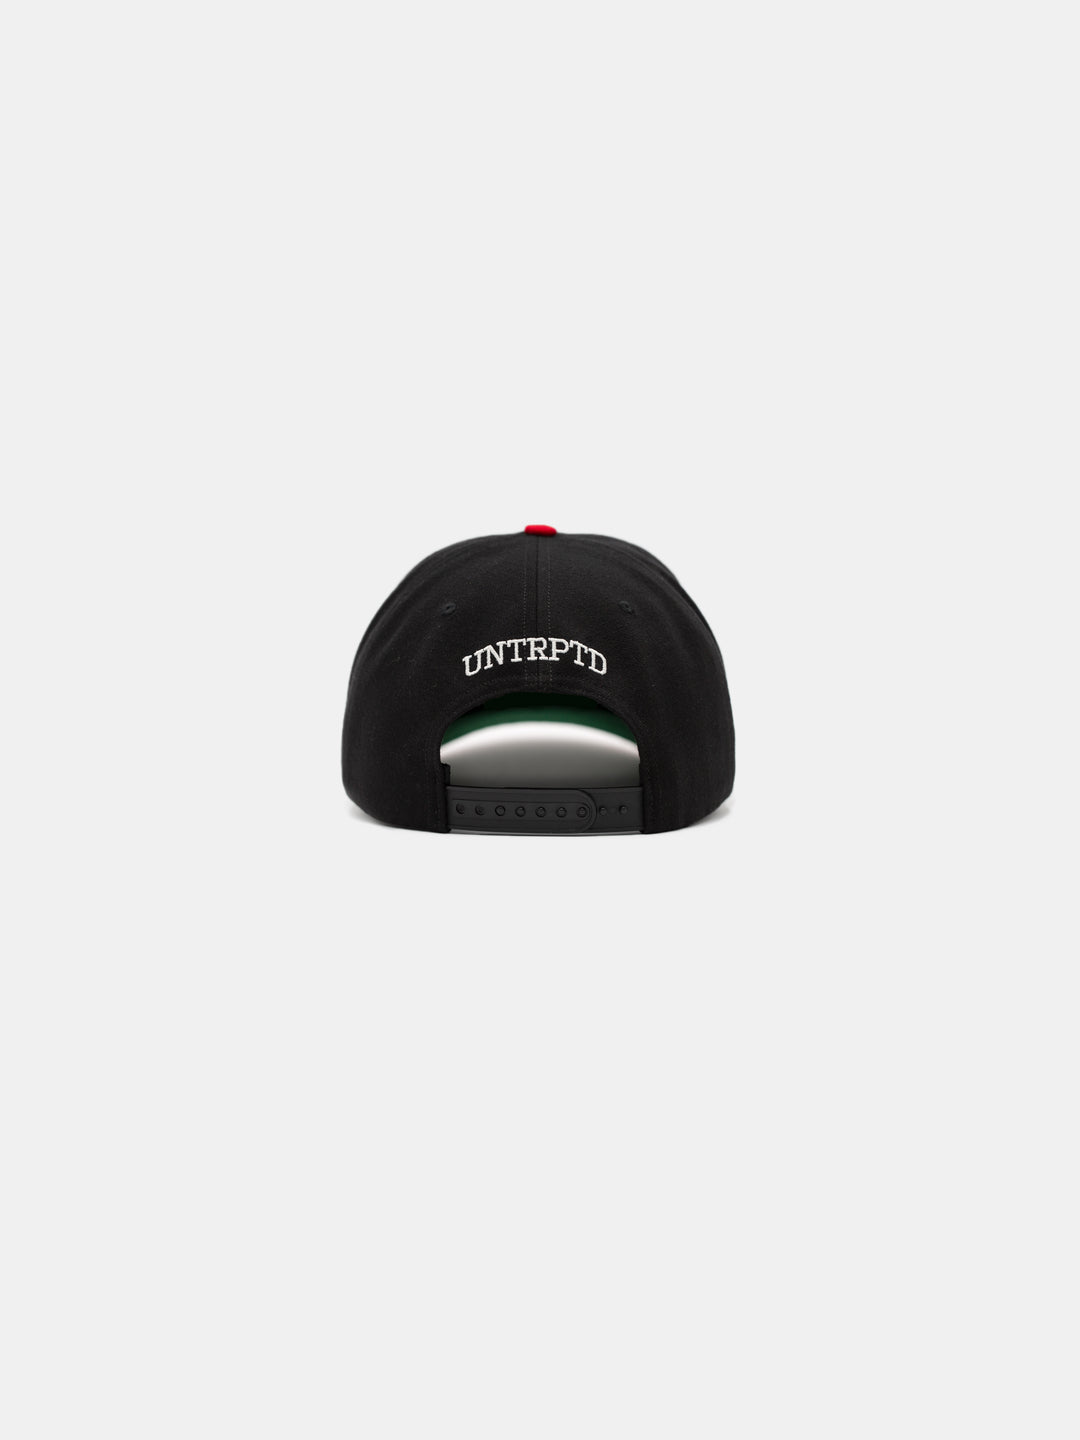 back of un chosen snapback hat in black and red